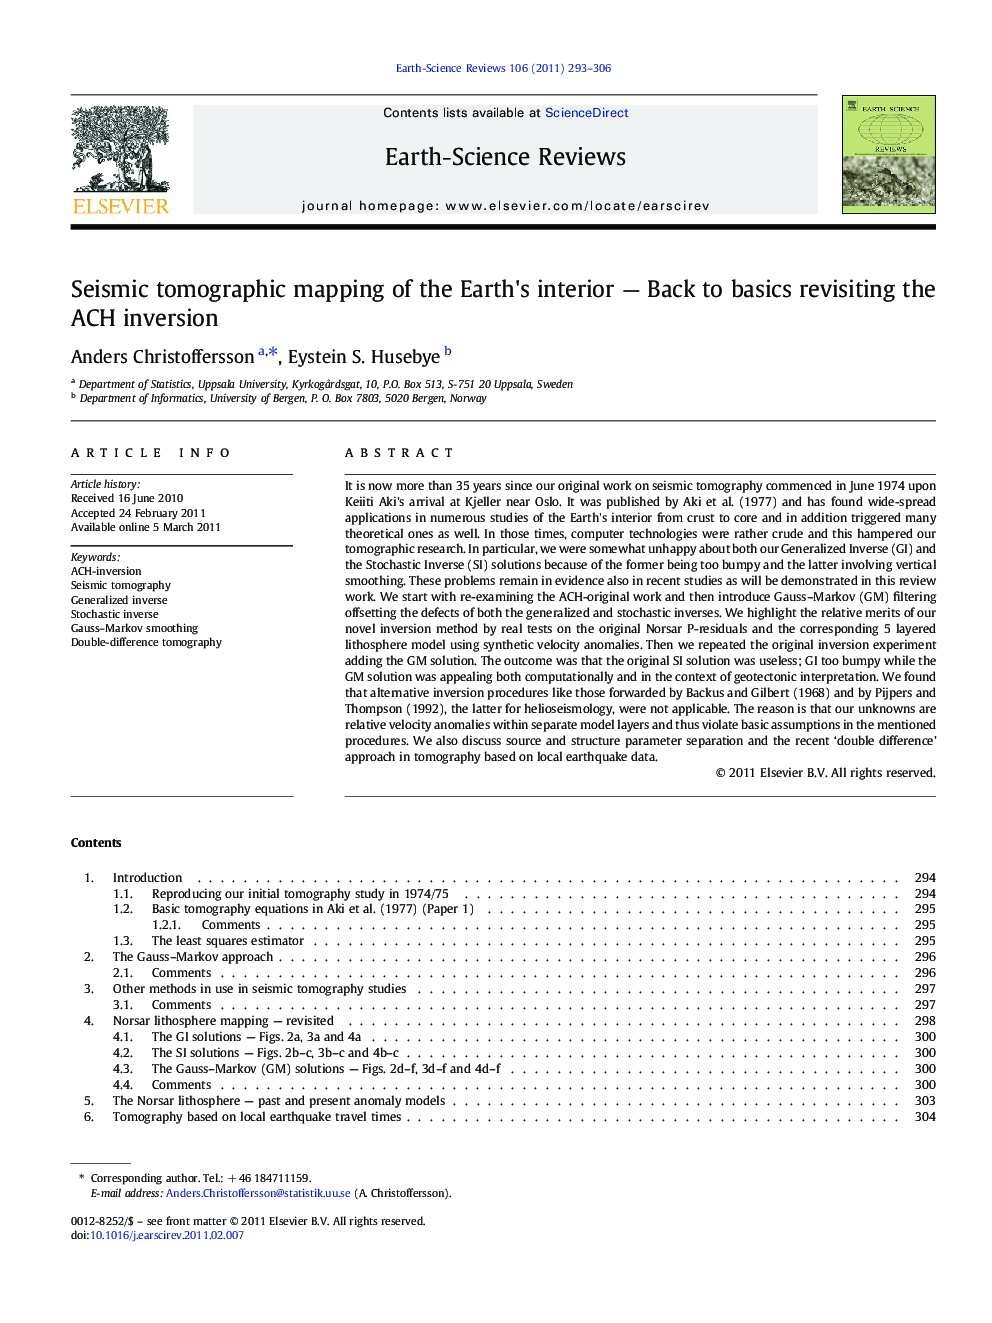 Seismic tomographic mapping of the Earth's interior — Back to basics revisiting the ACH inversion